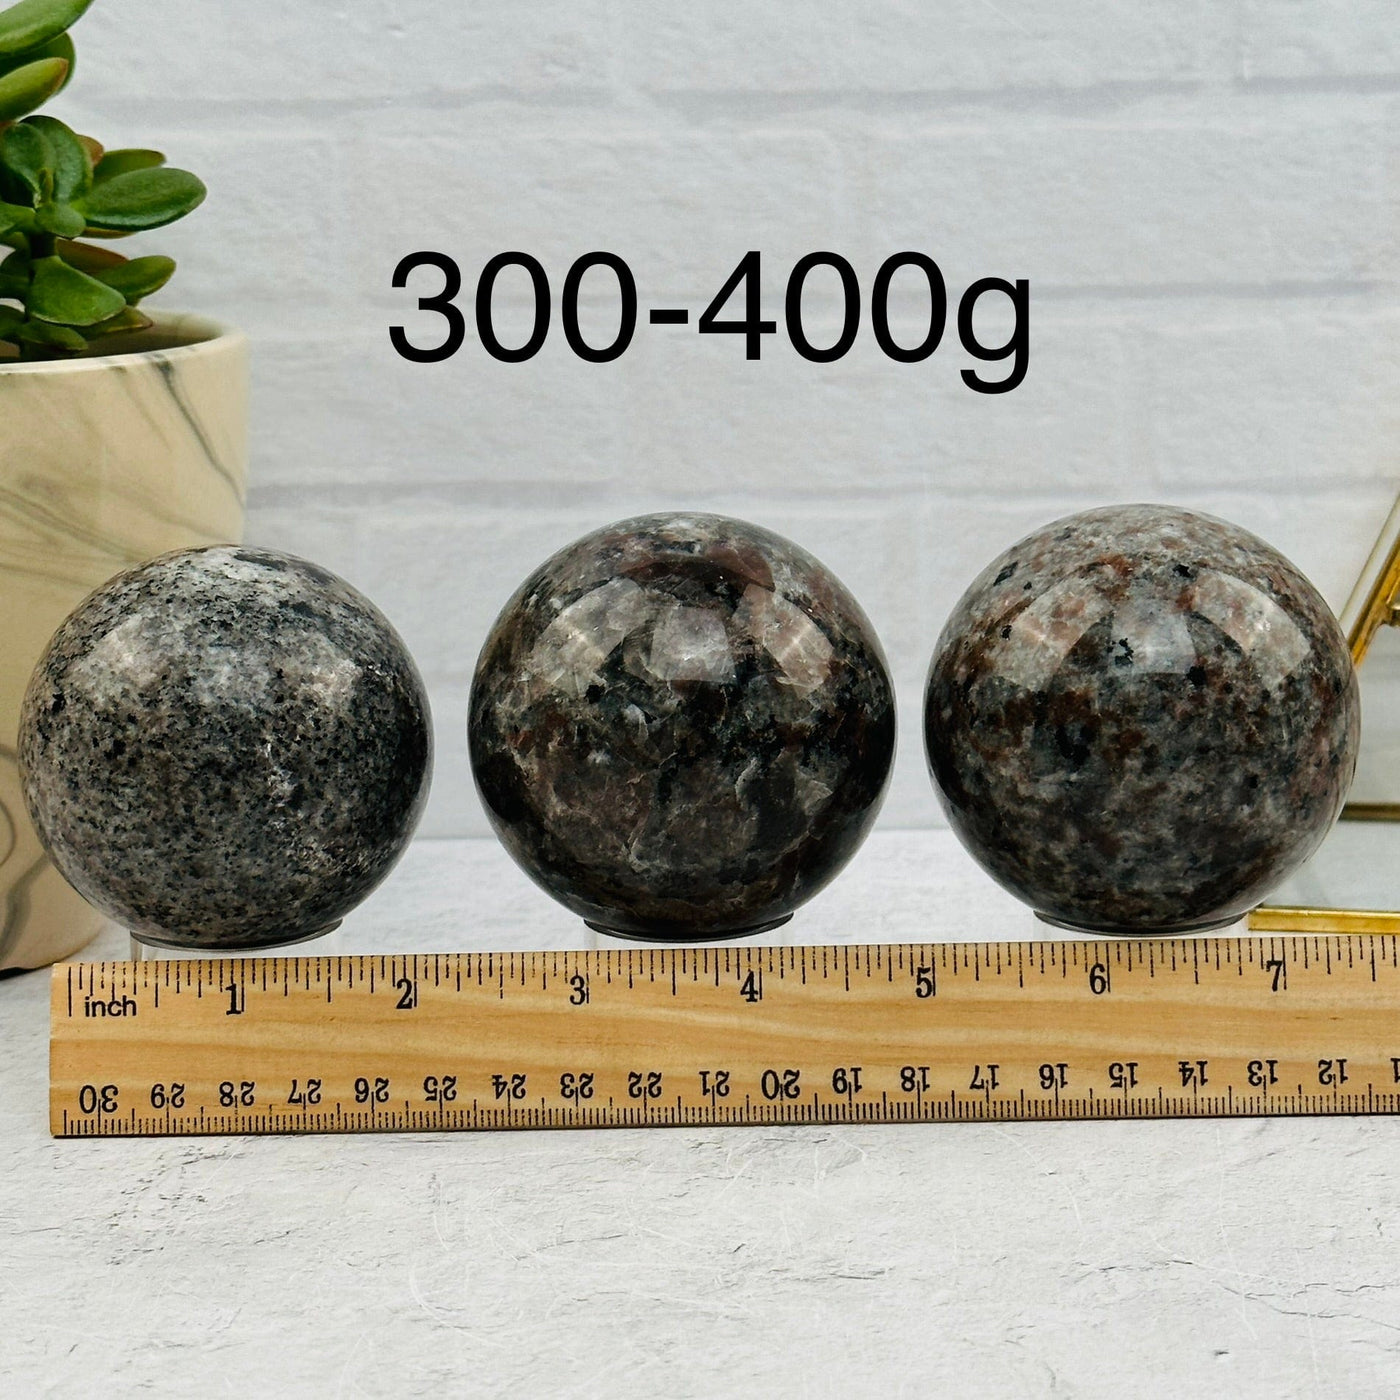 Yooperlite Spheres - By Weight - next to a ruler for size reference